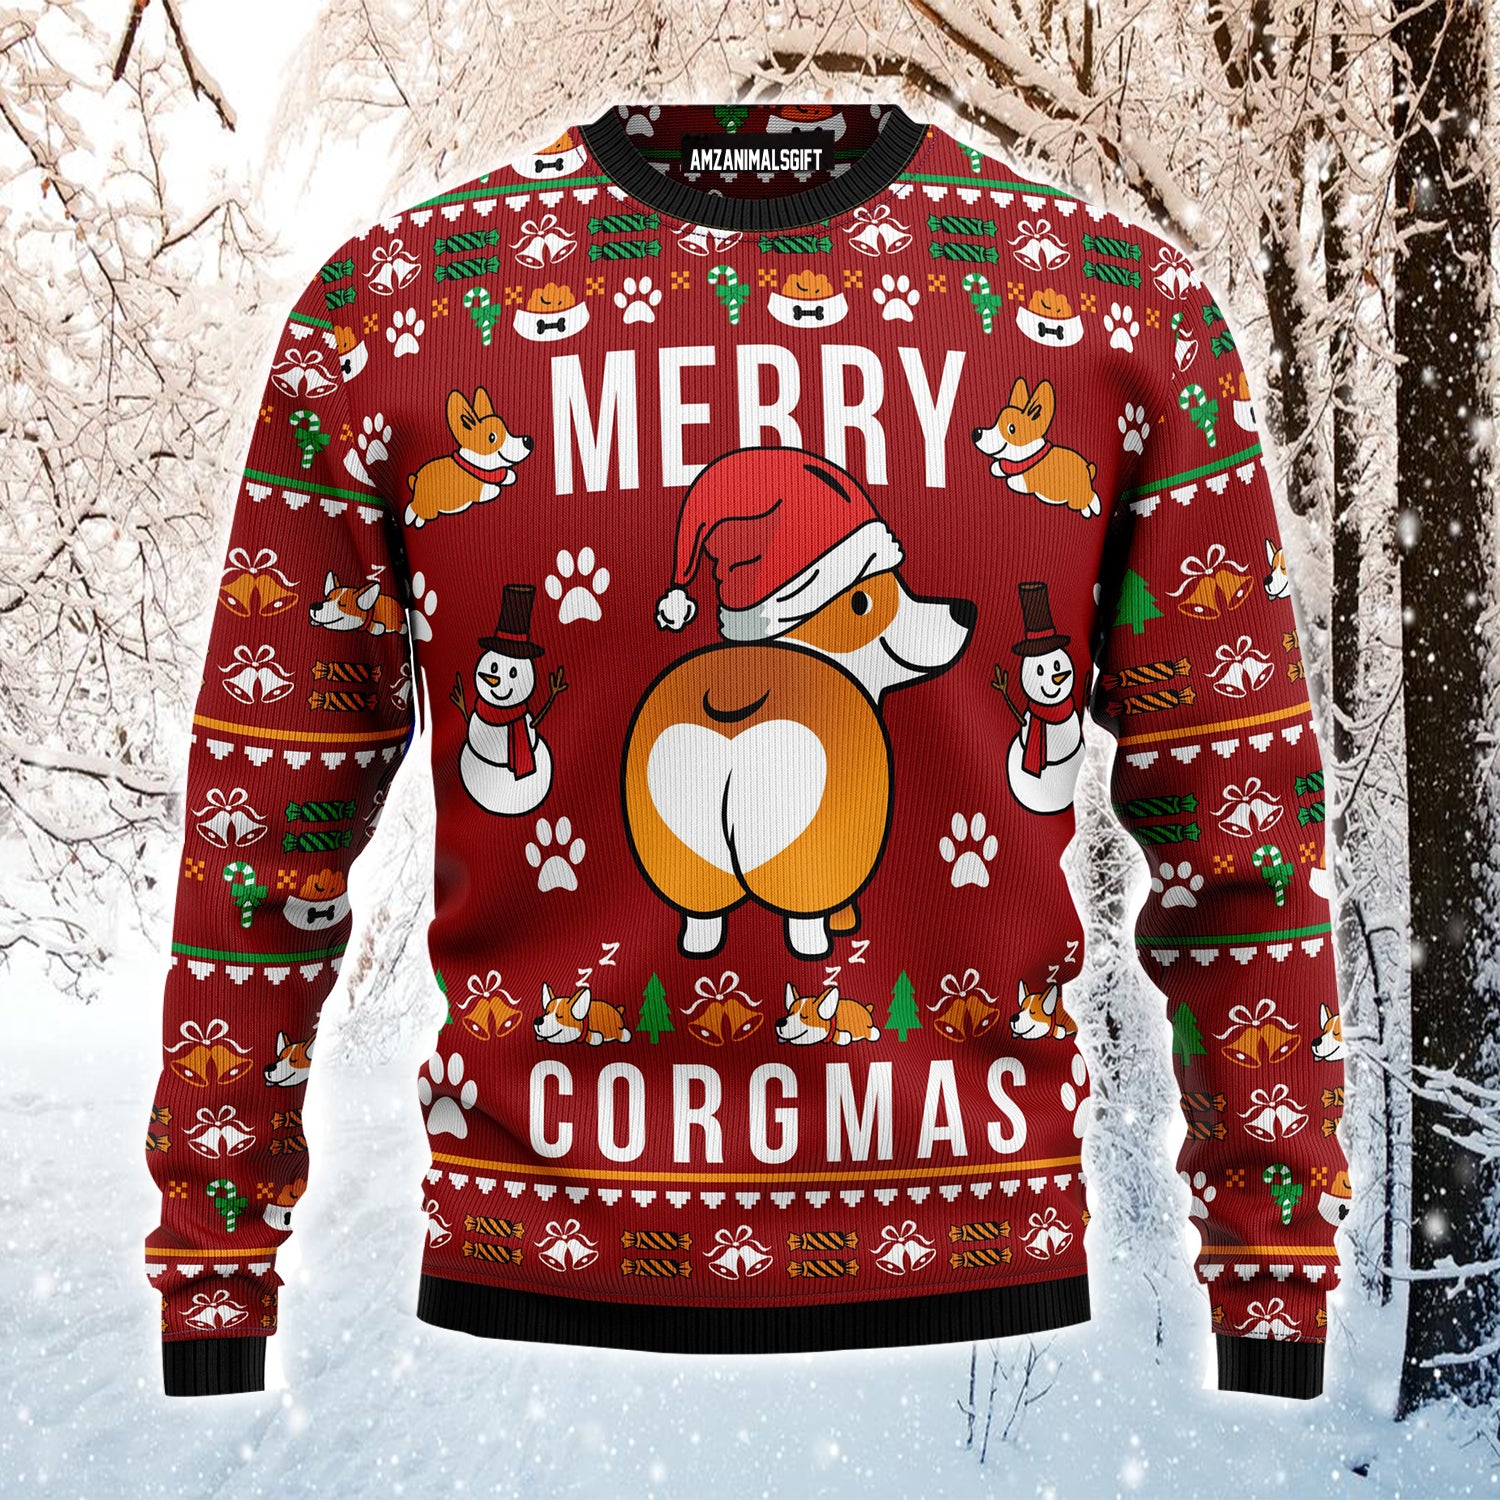 Funny Corgi Ugly Christmas Sweater, Merry Corgmas Pattern Ugly Sweater For Men & Women - Best Gift For Christmas, Friends, Corgi Lovers